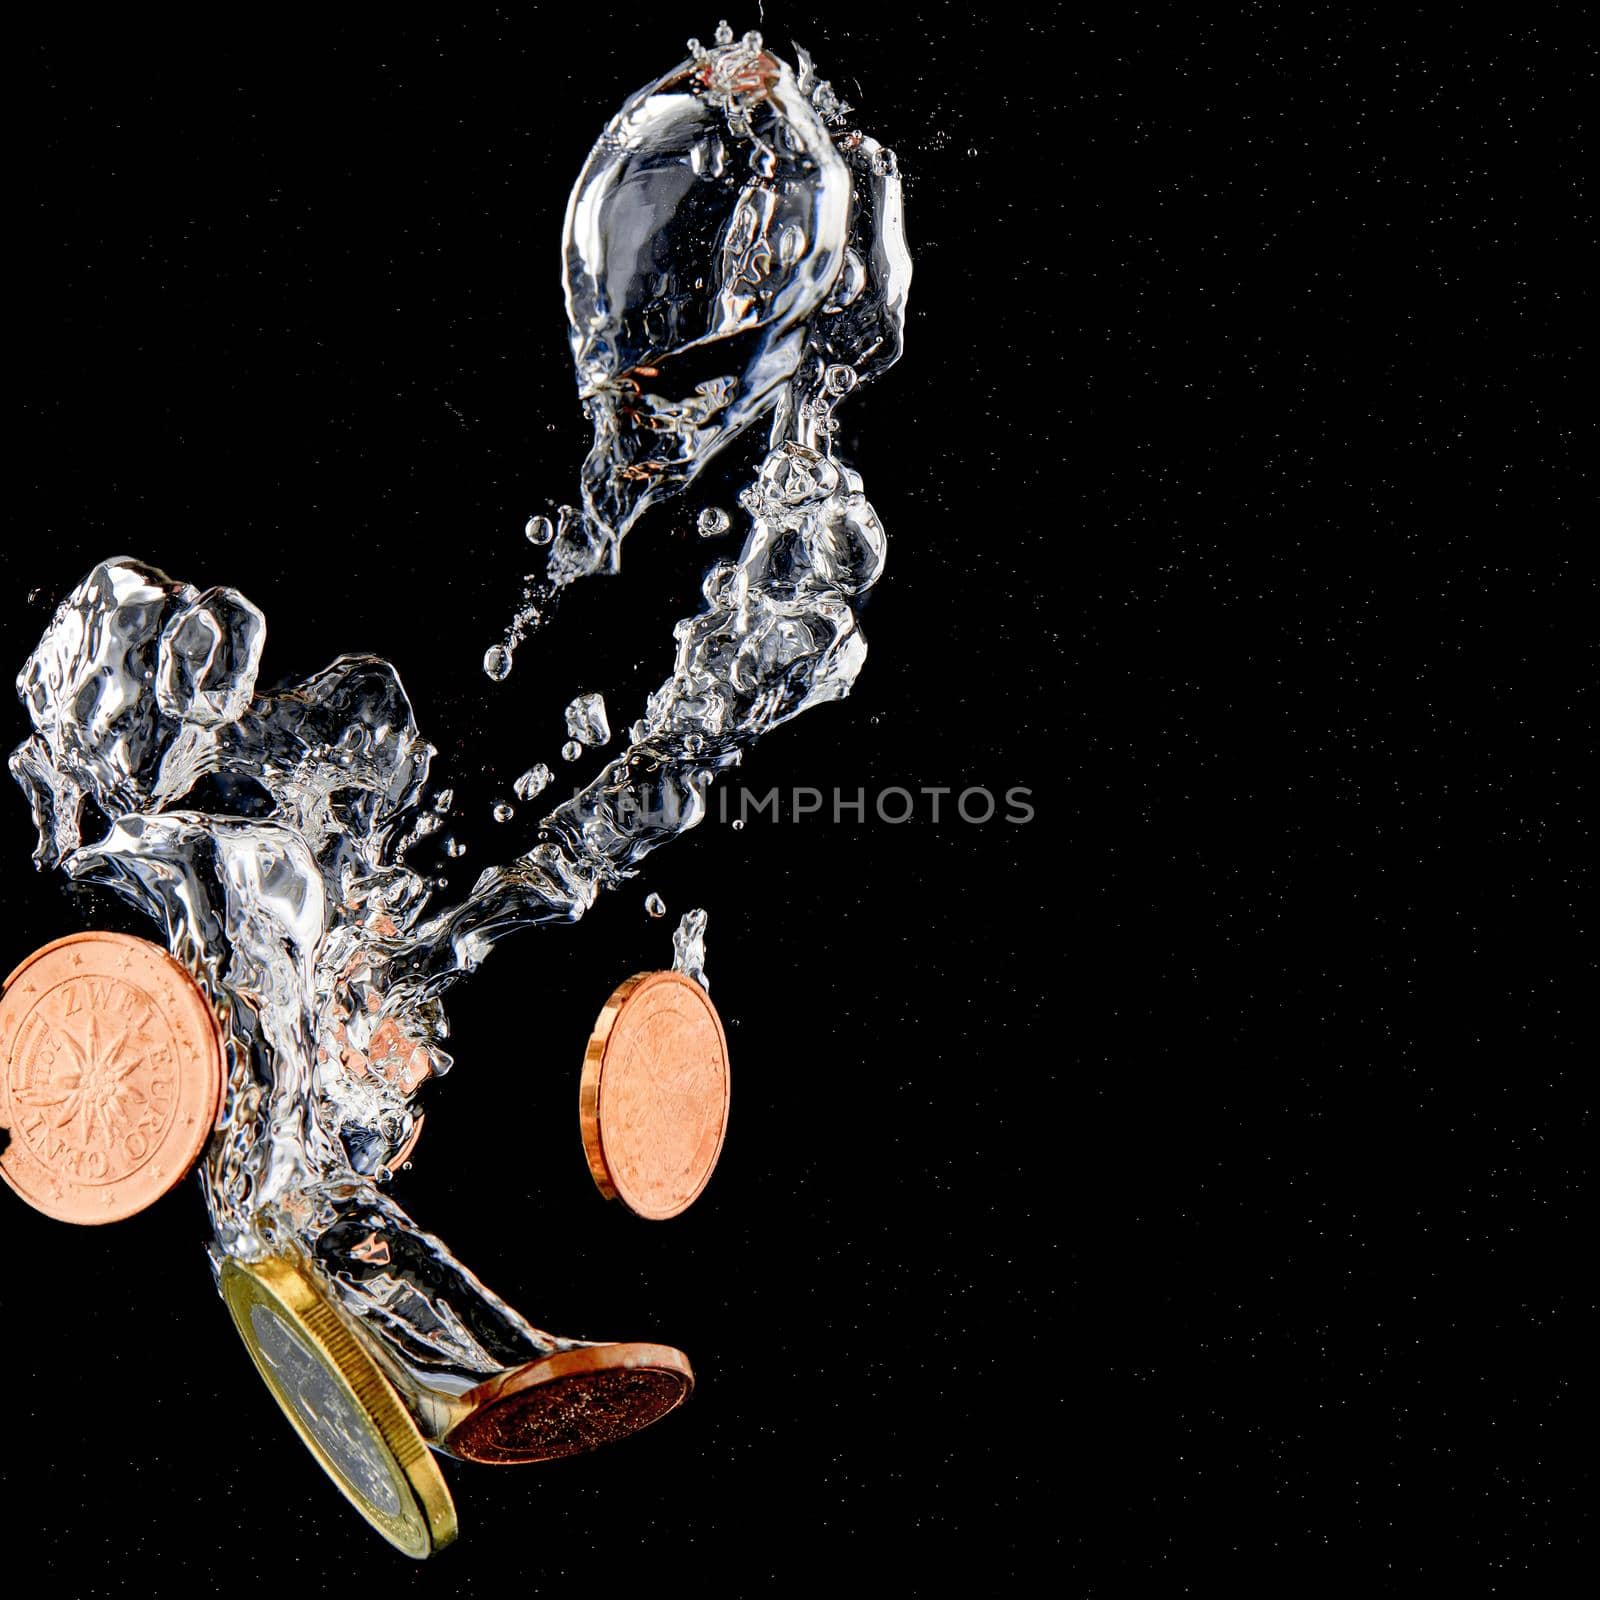 Sinking Euro. Splash of coins falling into the water. Coins in the water. Splash of coins falling into the water. by EvgeniyQW